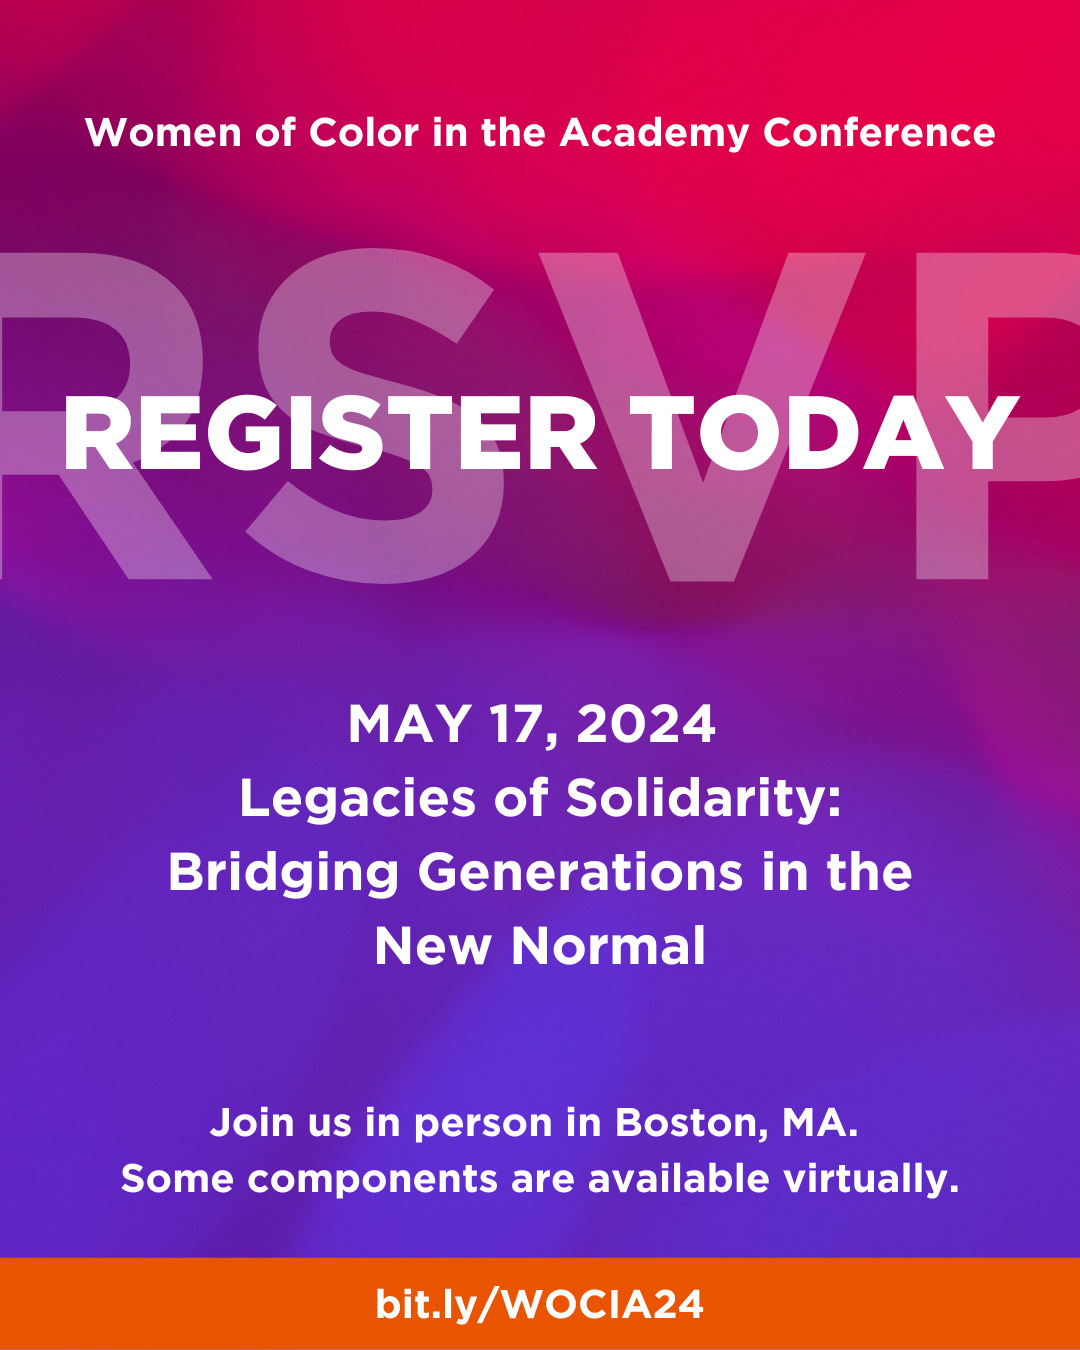 Women of Color in the Academy Conference Register now Flyer. May 17, 2024. Legacies of Solidarity: Bridging Generations in the New Normal. Join us in person in Boston, MA. Some components are available virtually. bit.ly/wocia